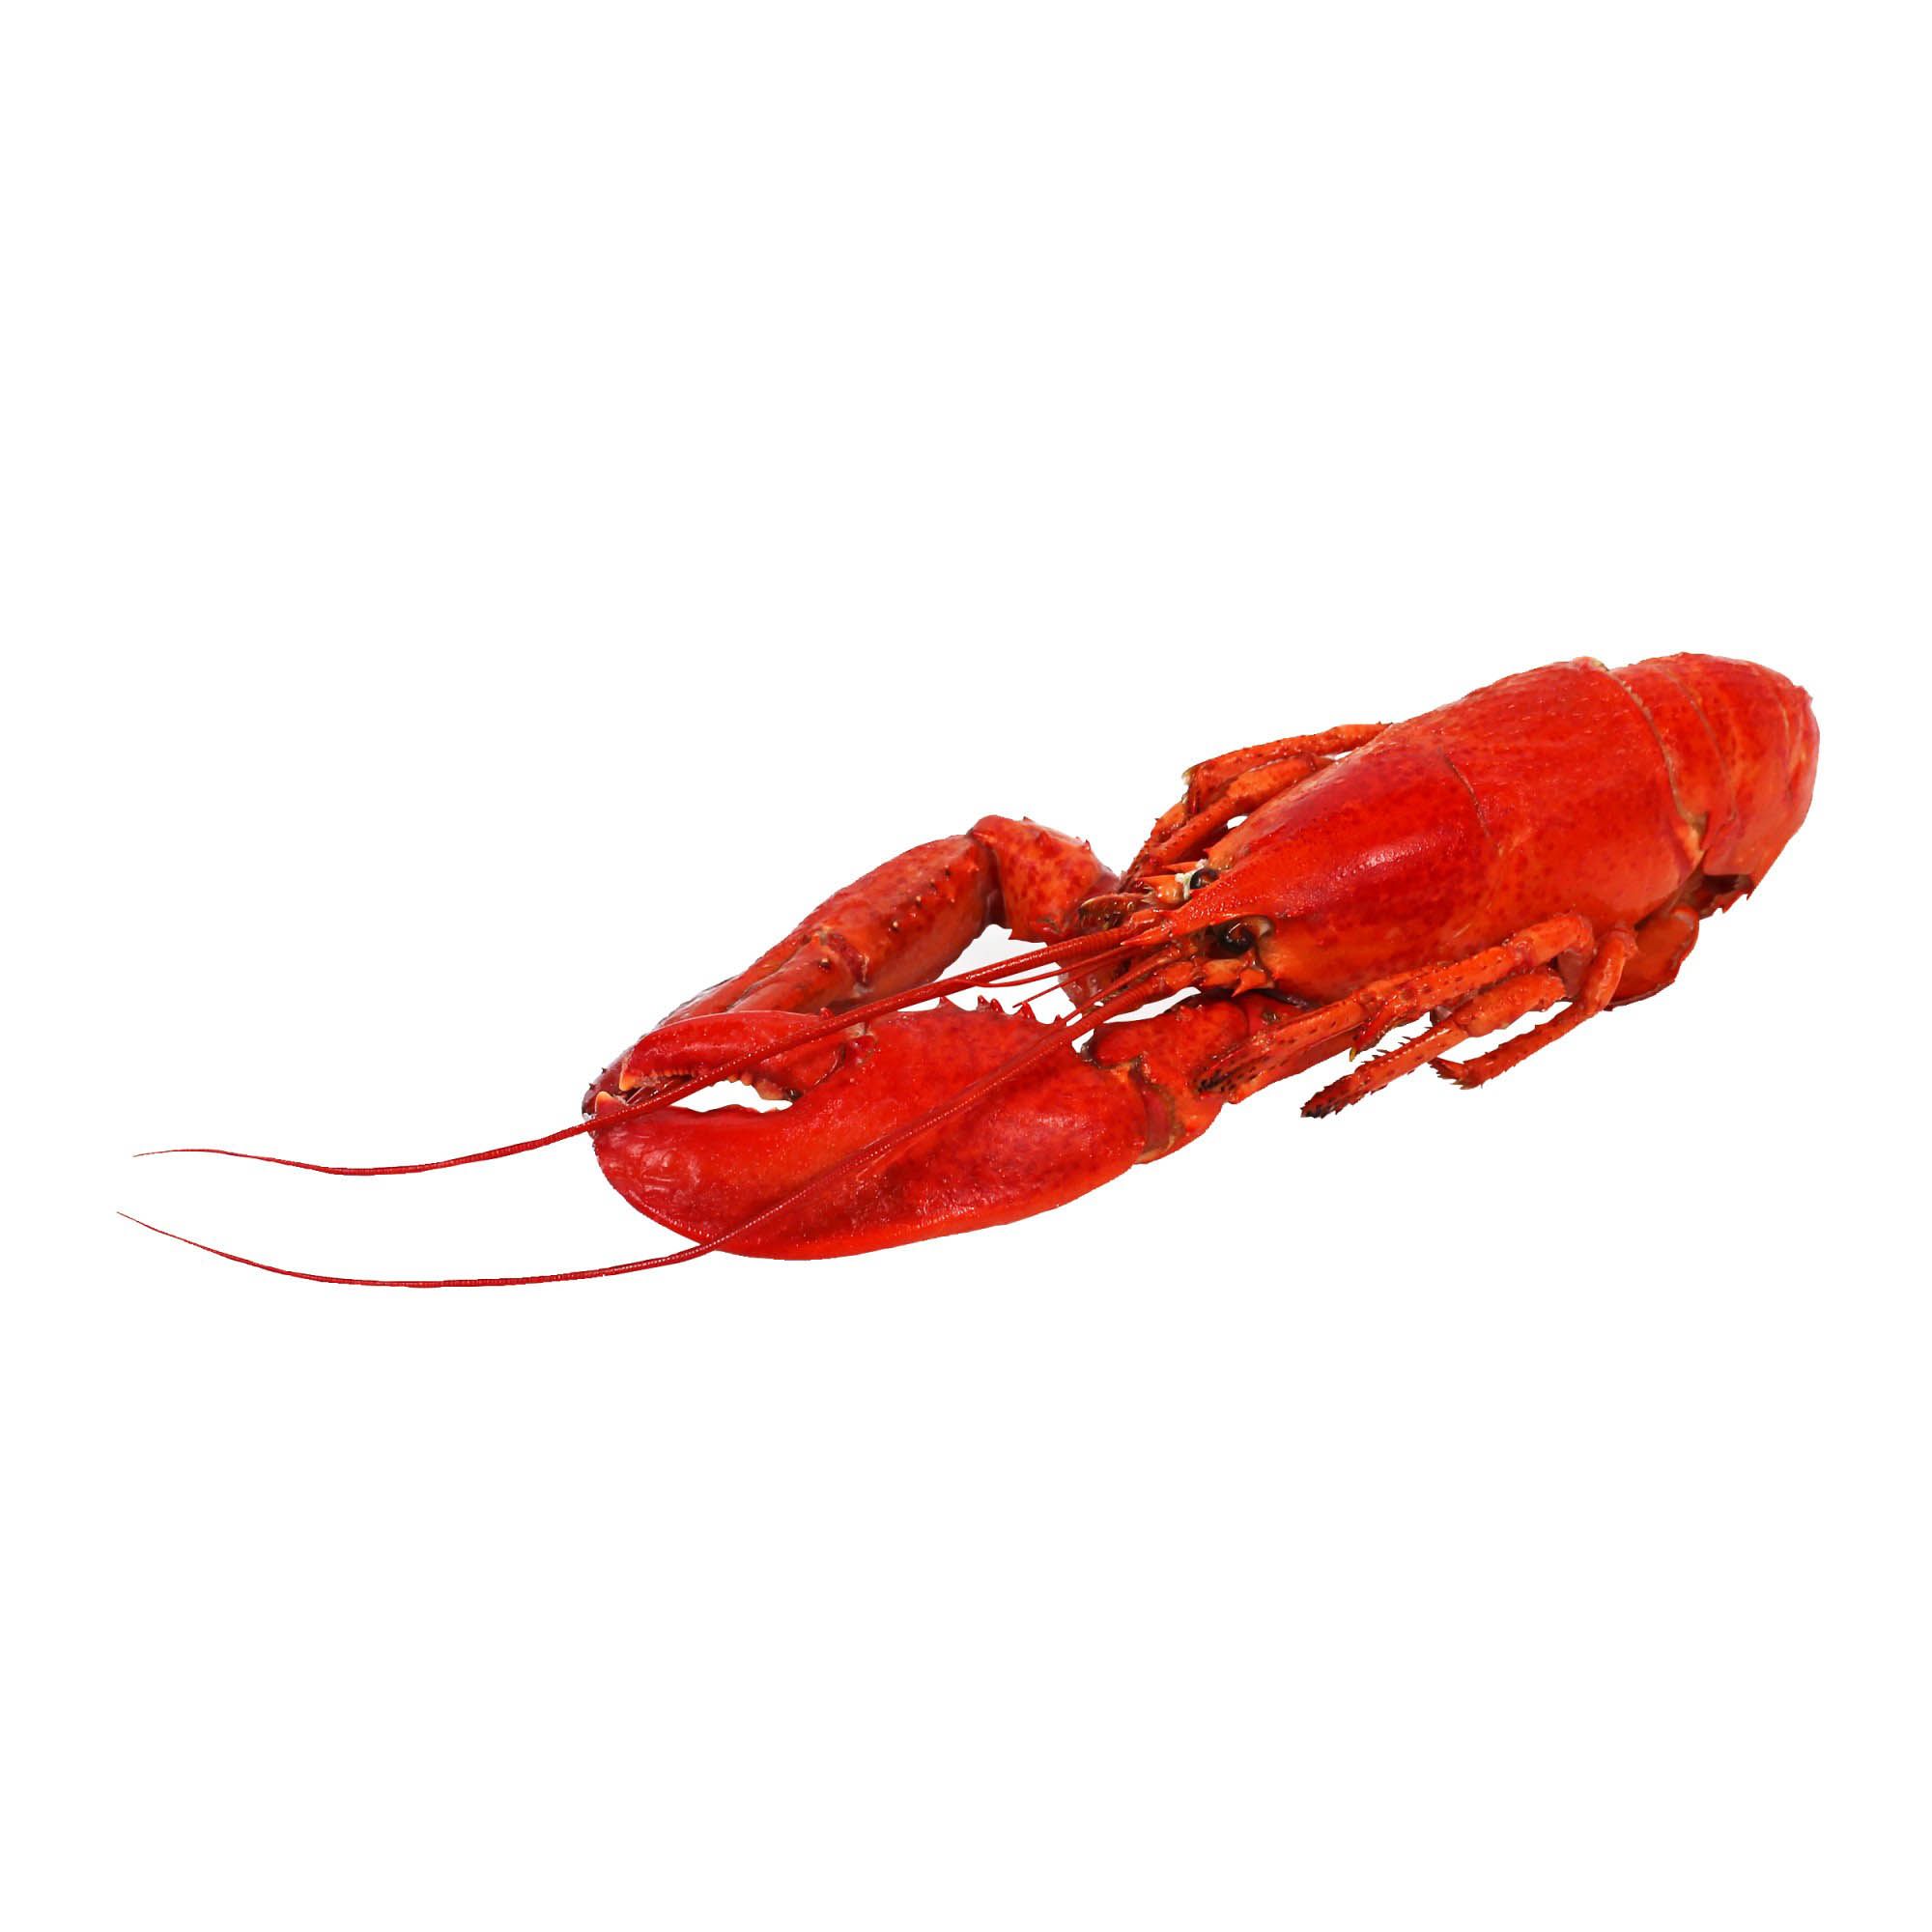 Sea Best Whole Cooked Lobster, 1-1.25 lbs.